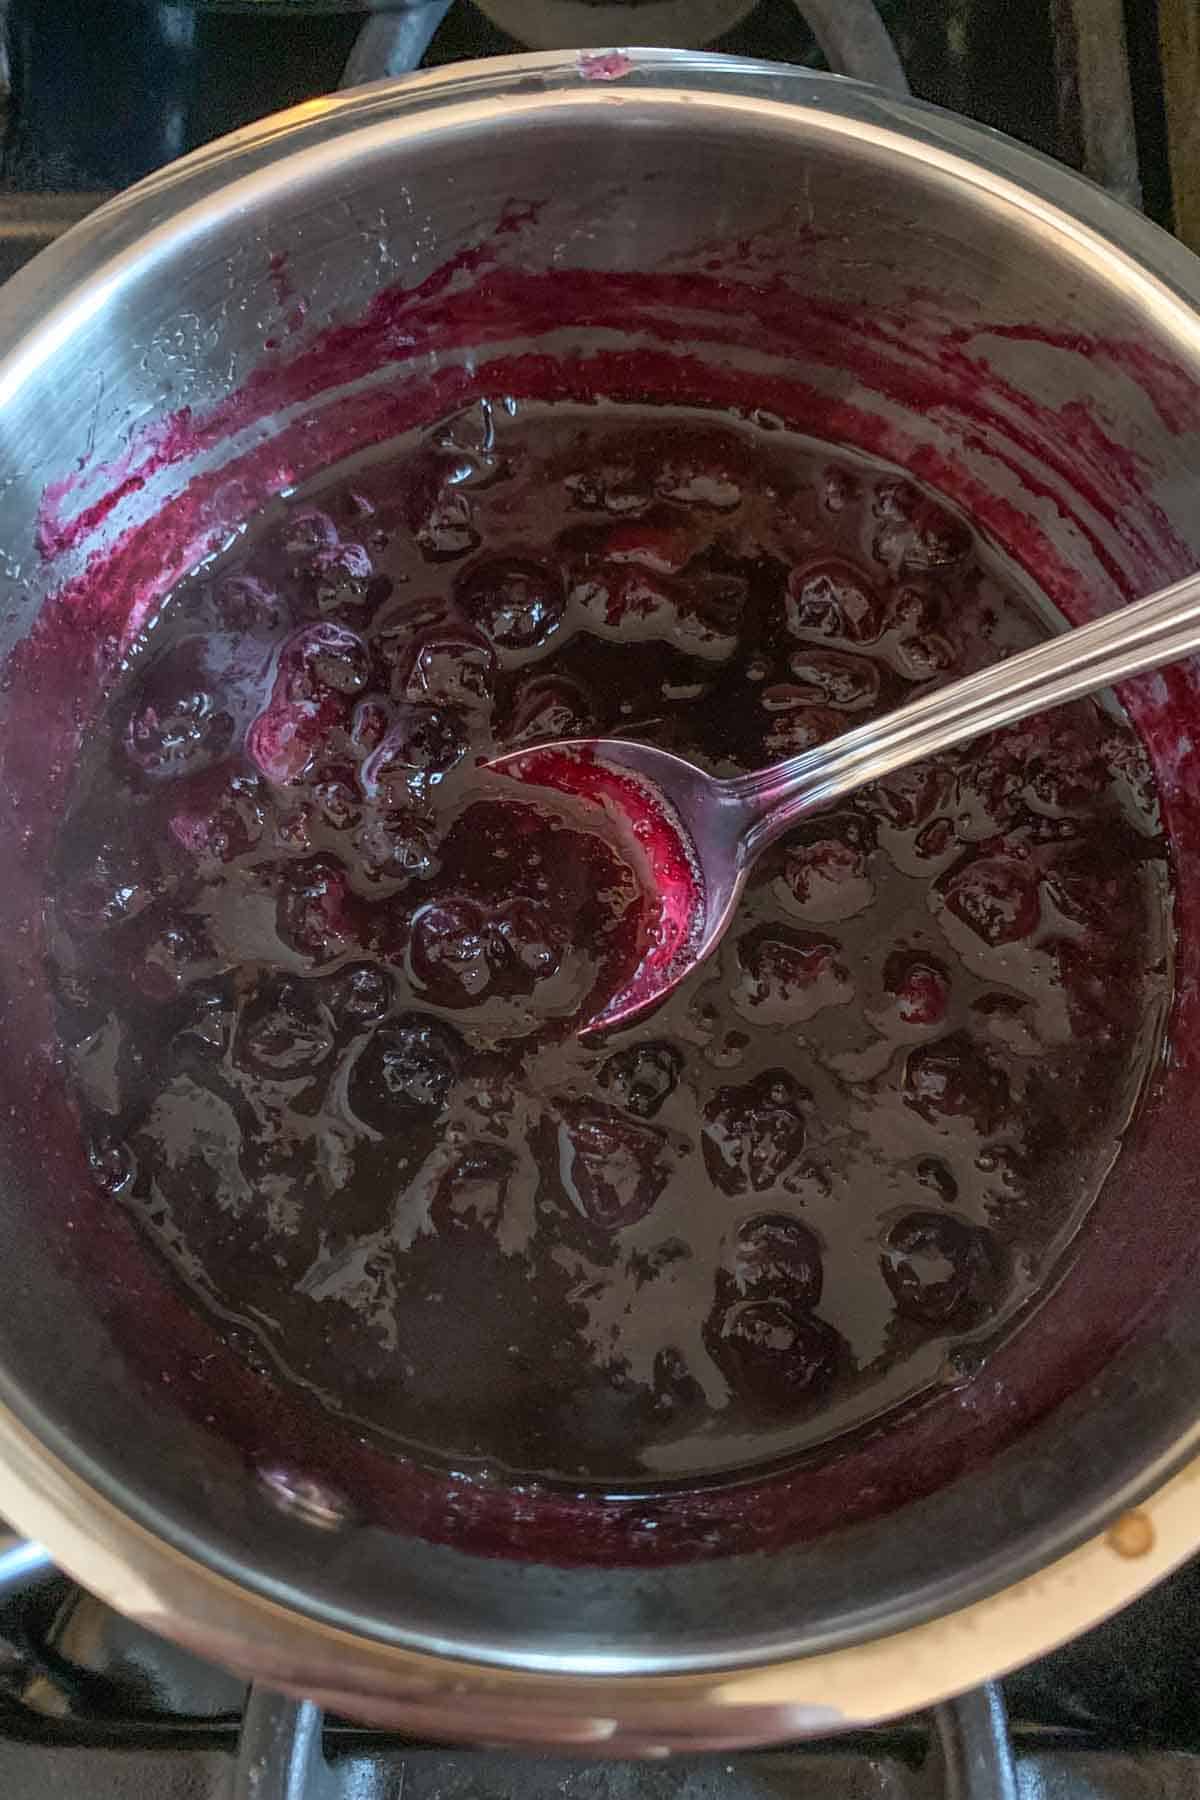 Blueberry sauce in a small saucepan on the stove.